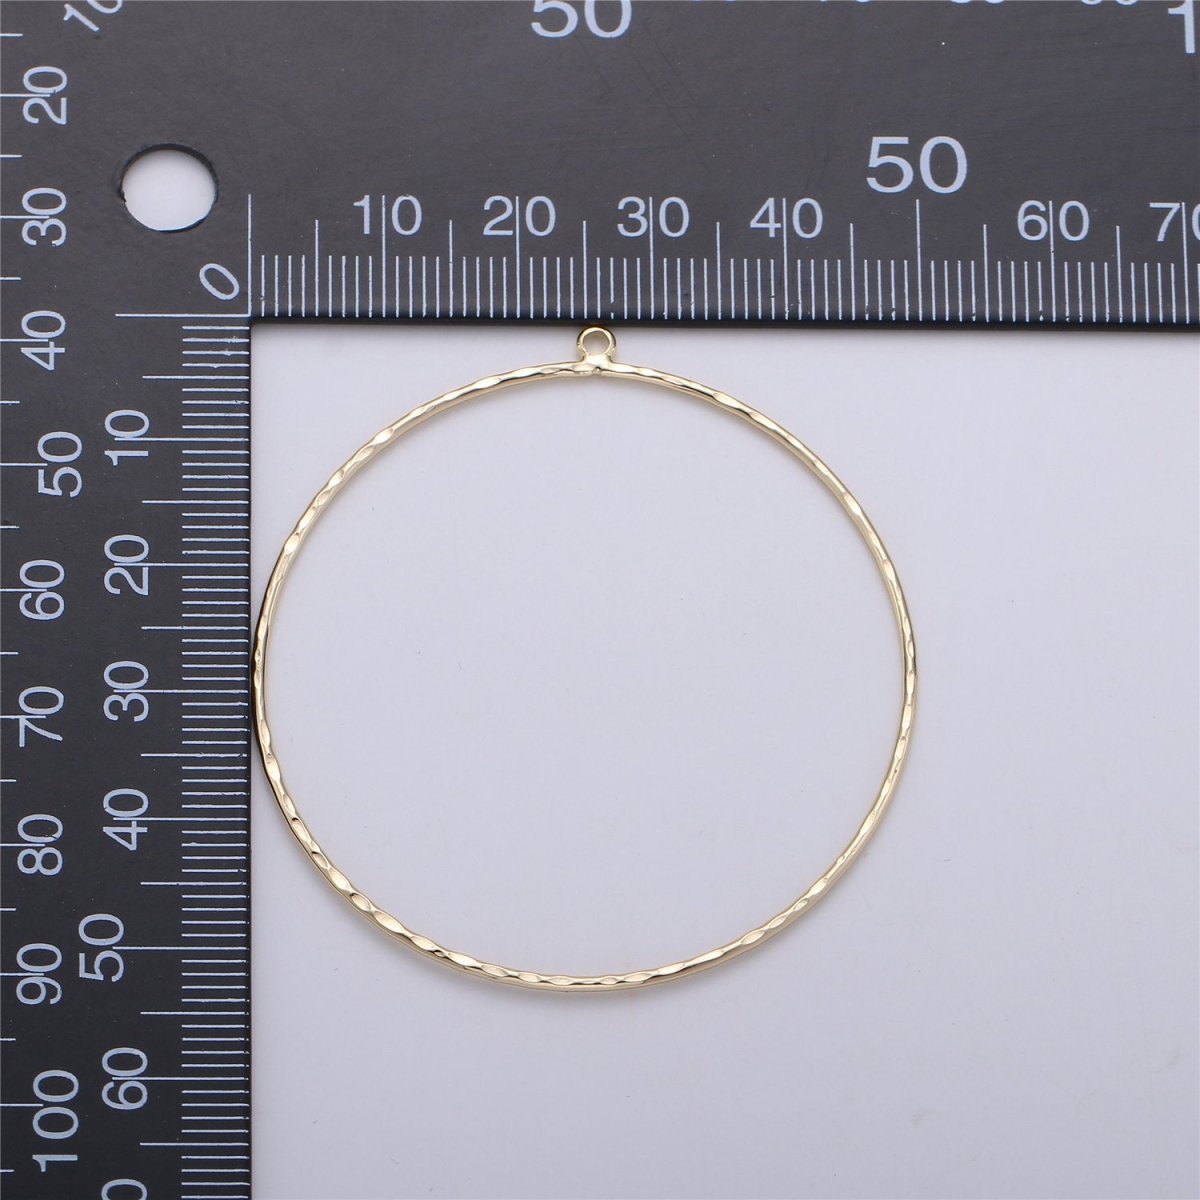 55x50mm Hammered Big circle round charm Geometric pendant 14k Gold Filled for earring making necklace DIY Jewelry Findings Supplies K-226 - DLUXCA